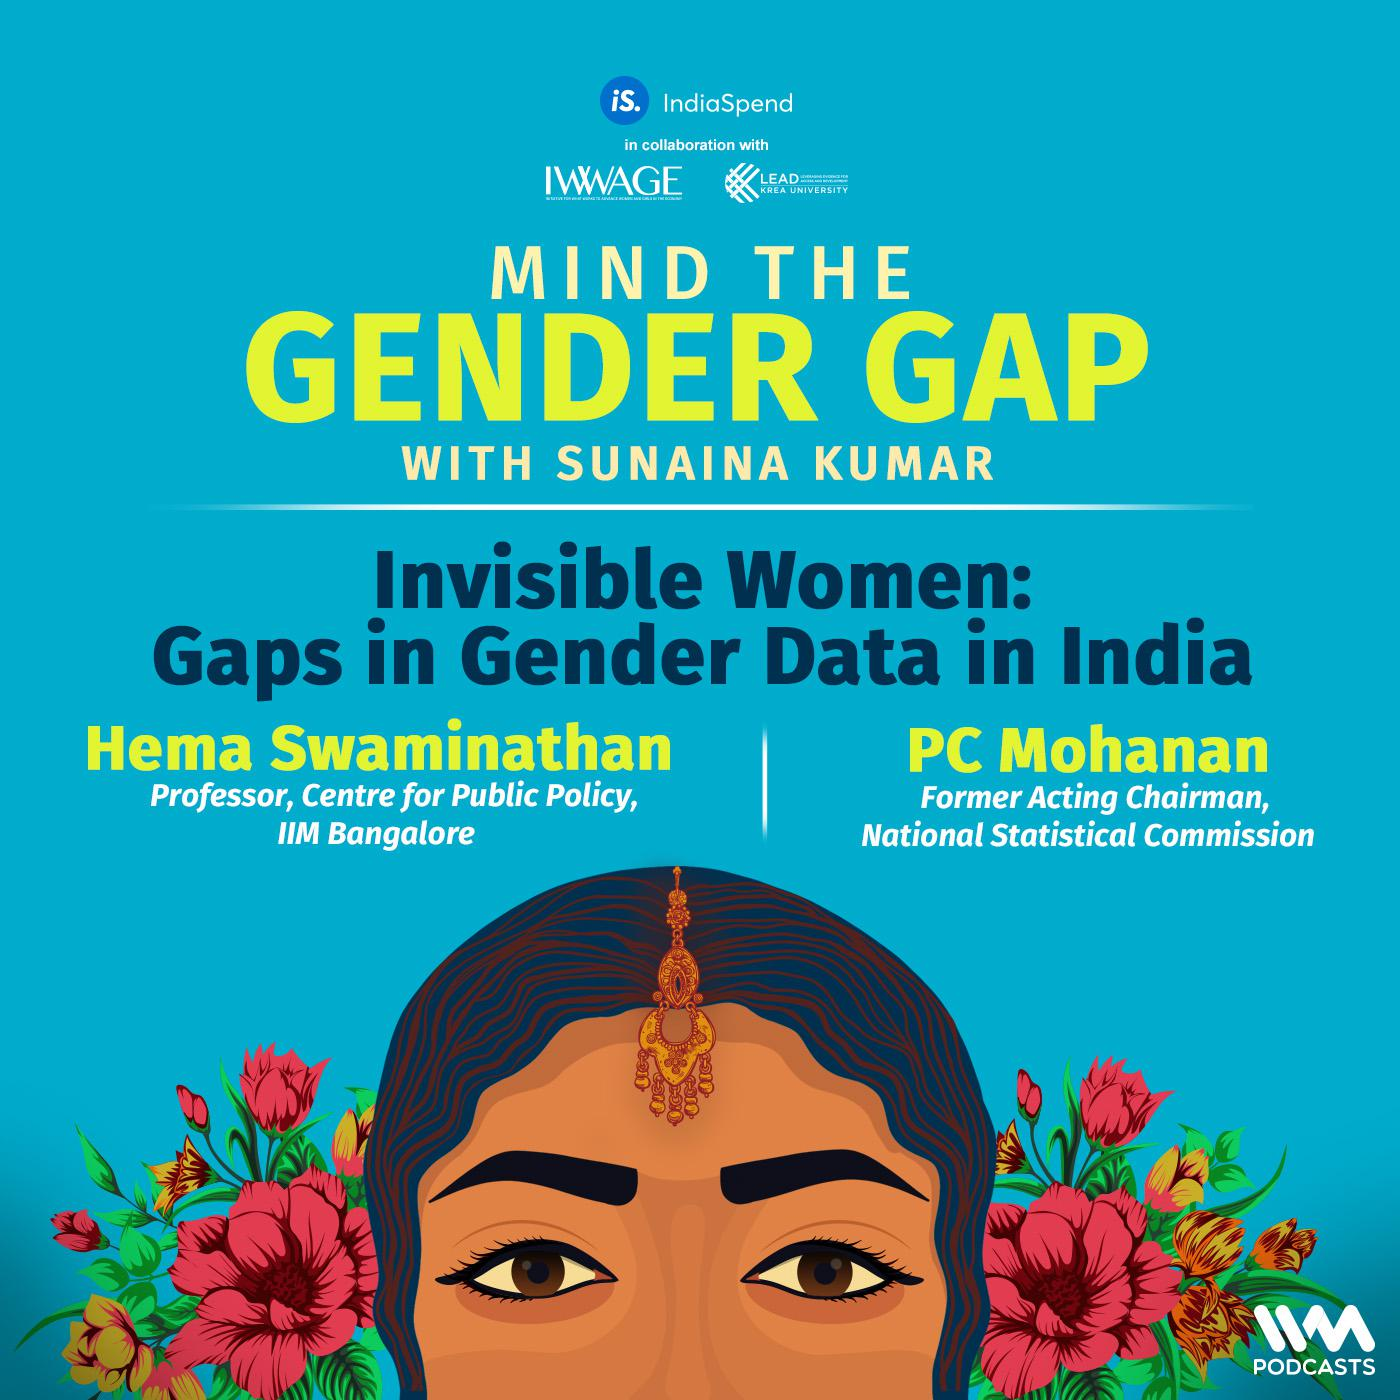 Invisible Women: Gaps in Gender Data in India